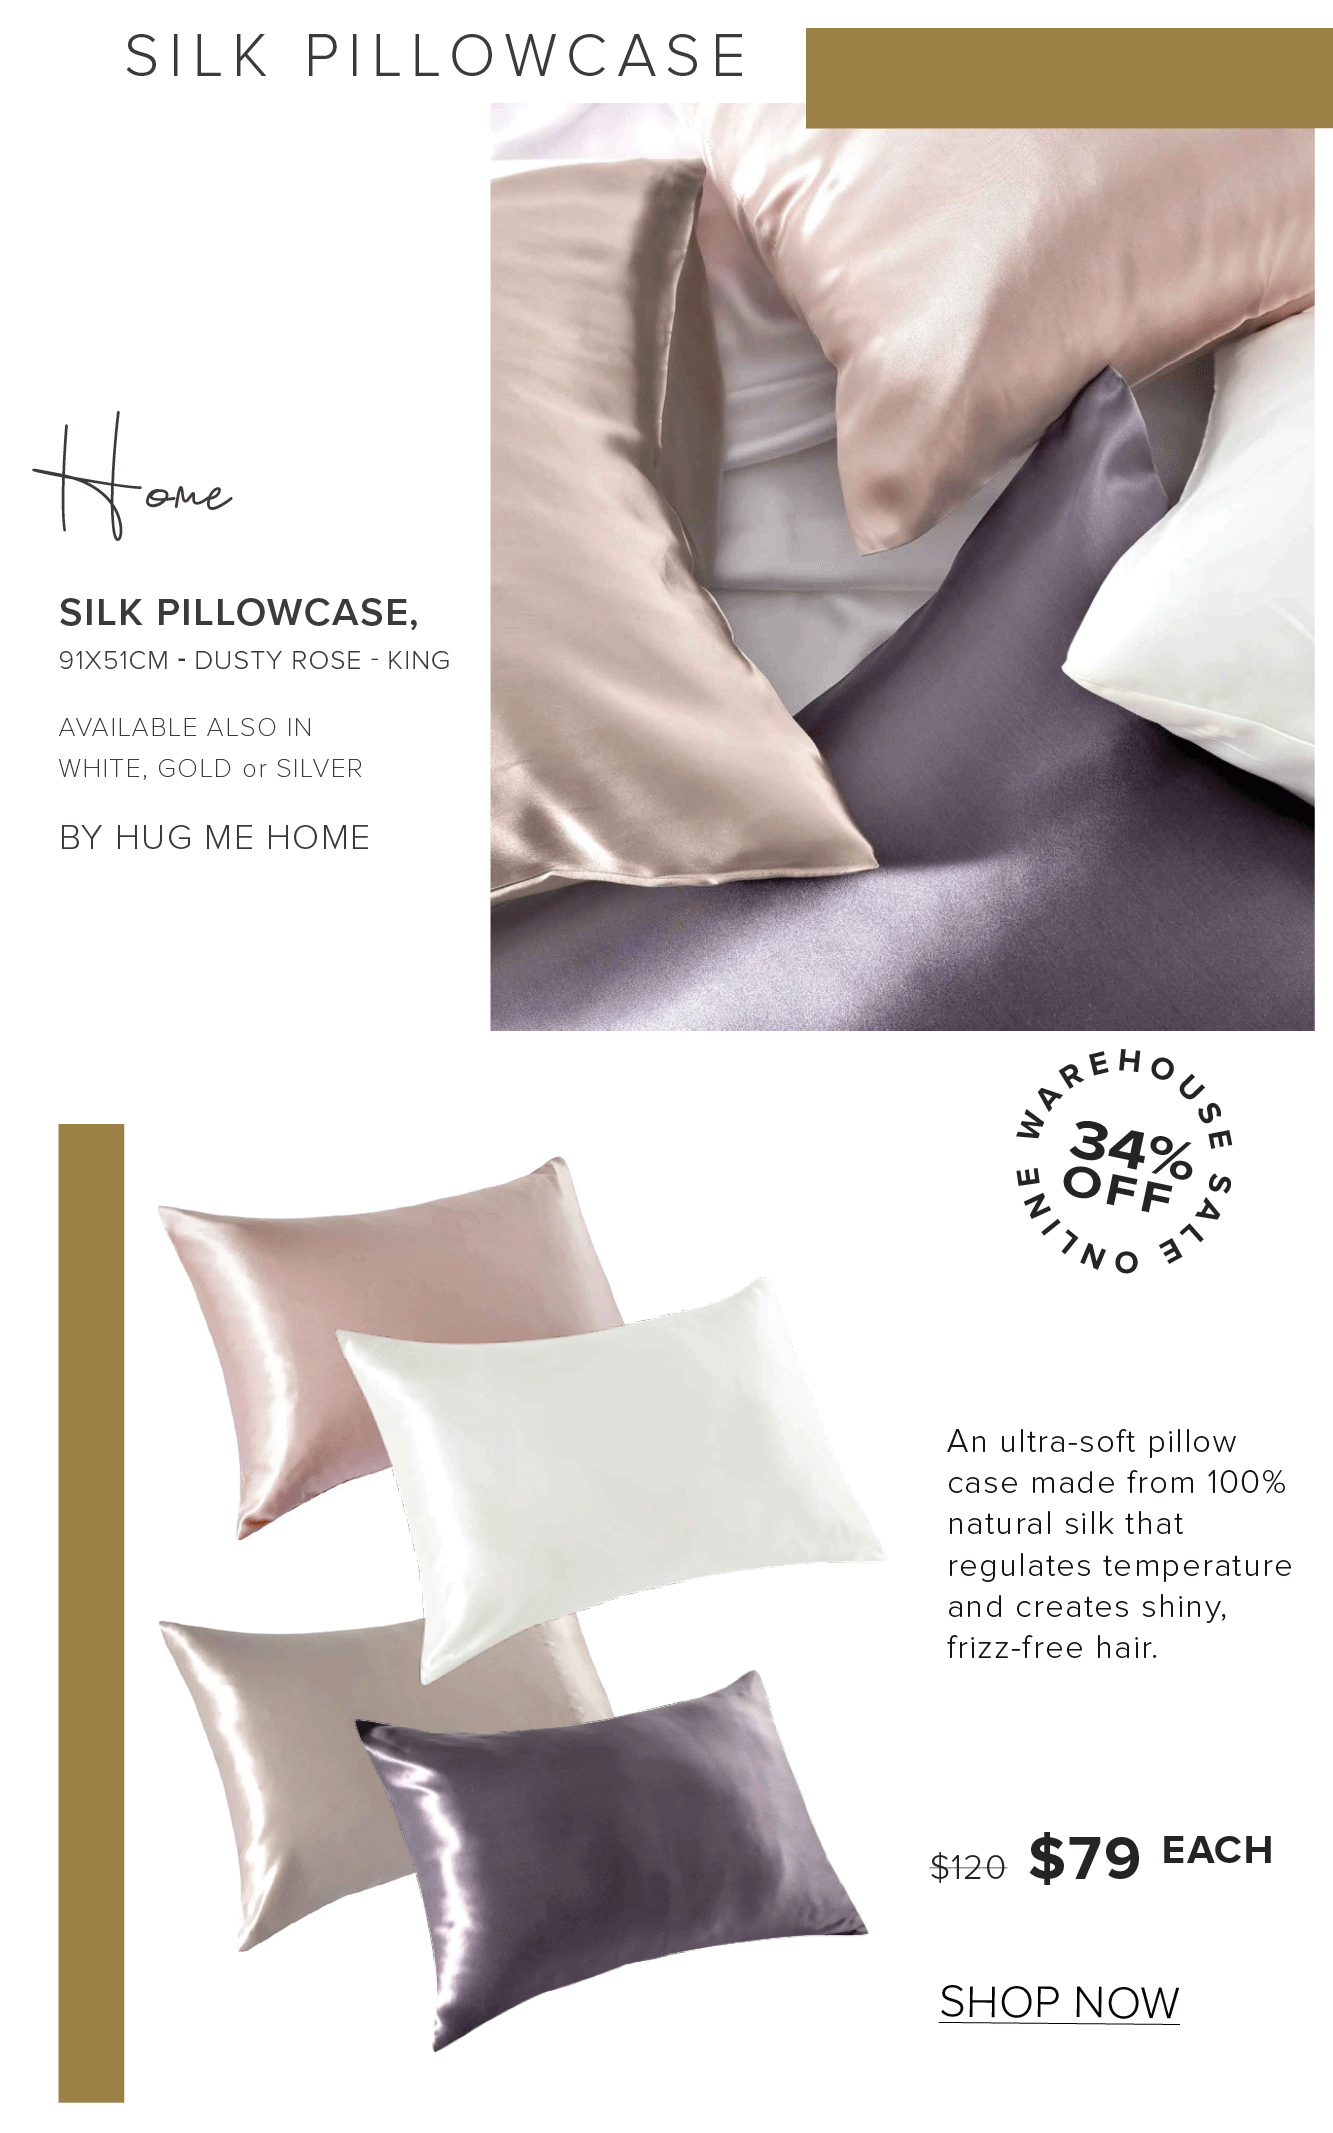 SILK PILLOWCASE eMme SILK PILLOWCASE, 91X51CM - DUSTY ROSE - KING AVAILABLE ALSO IN WHITE, GOLD or SILVER BY HUG ME HOME An ultra-soft pillow case made from 100% natural silk that regulates temperature and creates shiny, frizz-free hair. s120 $79 EACH SHOP NOW 